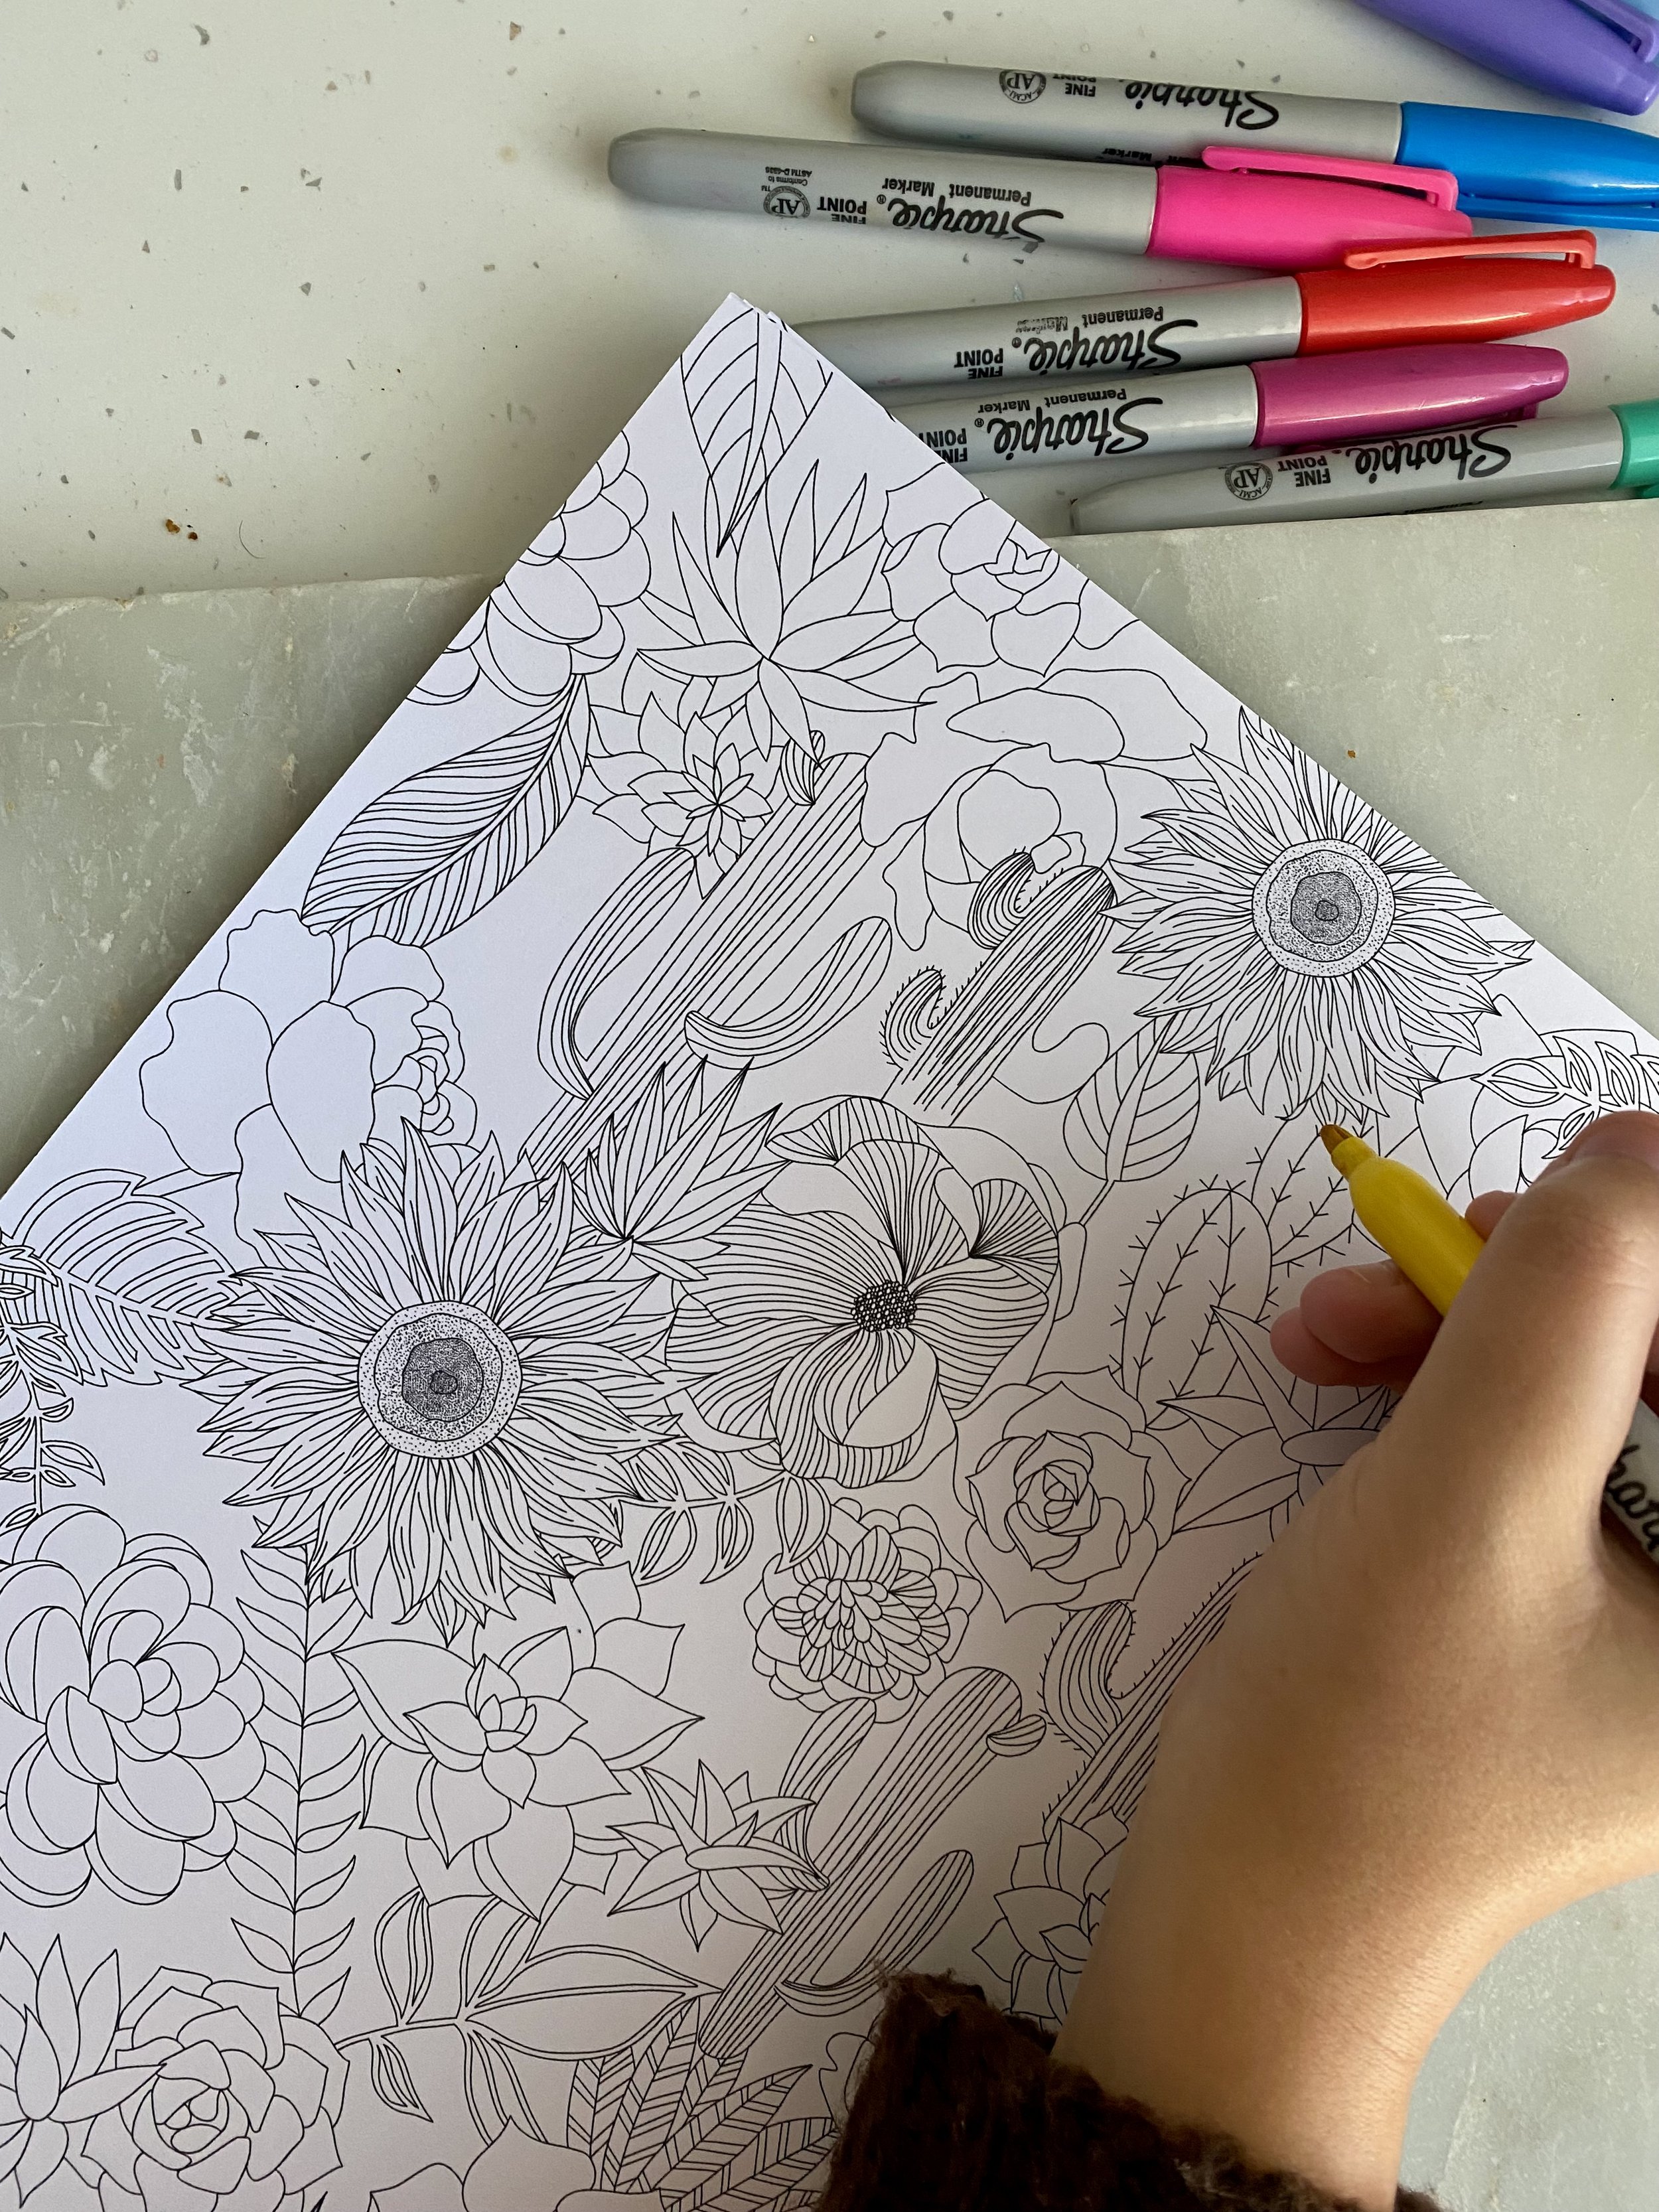 Colour your own print artwork colouring pages yellow â sisters design ltd